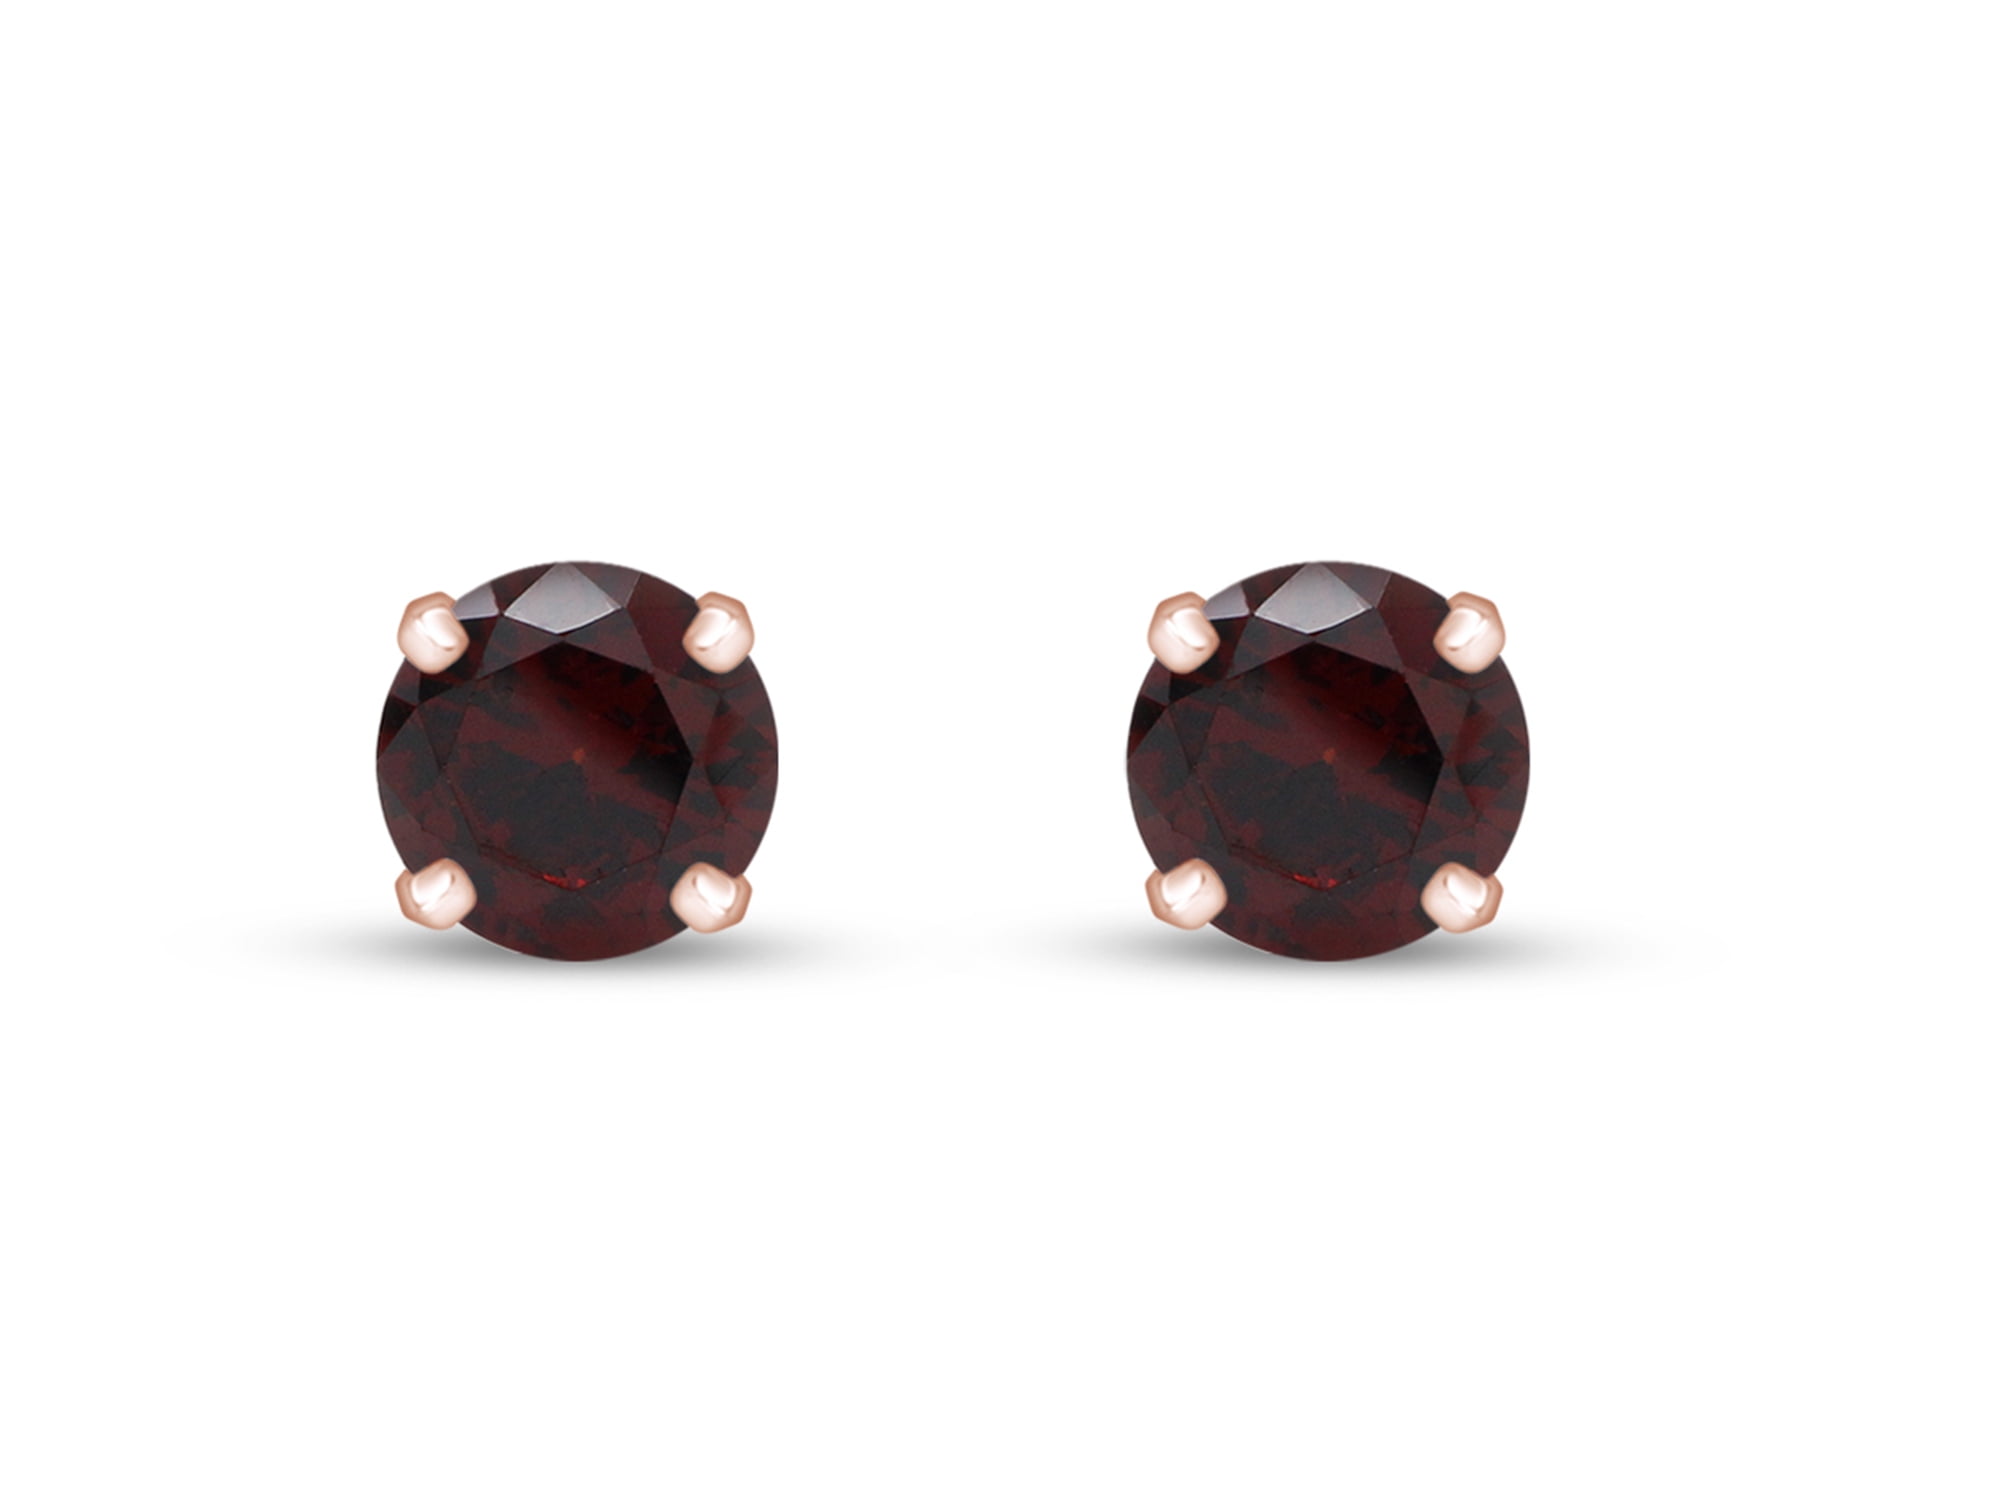 Solid 14k White Gold 3mm Simulated Garnet Stud Earrings 3mm x 3mm 